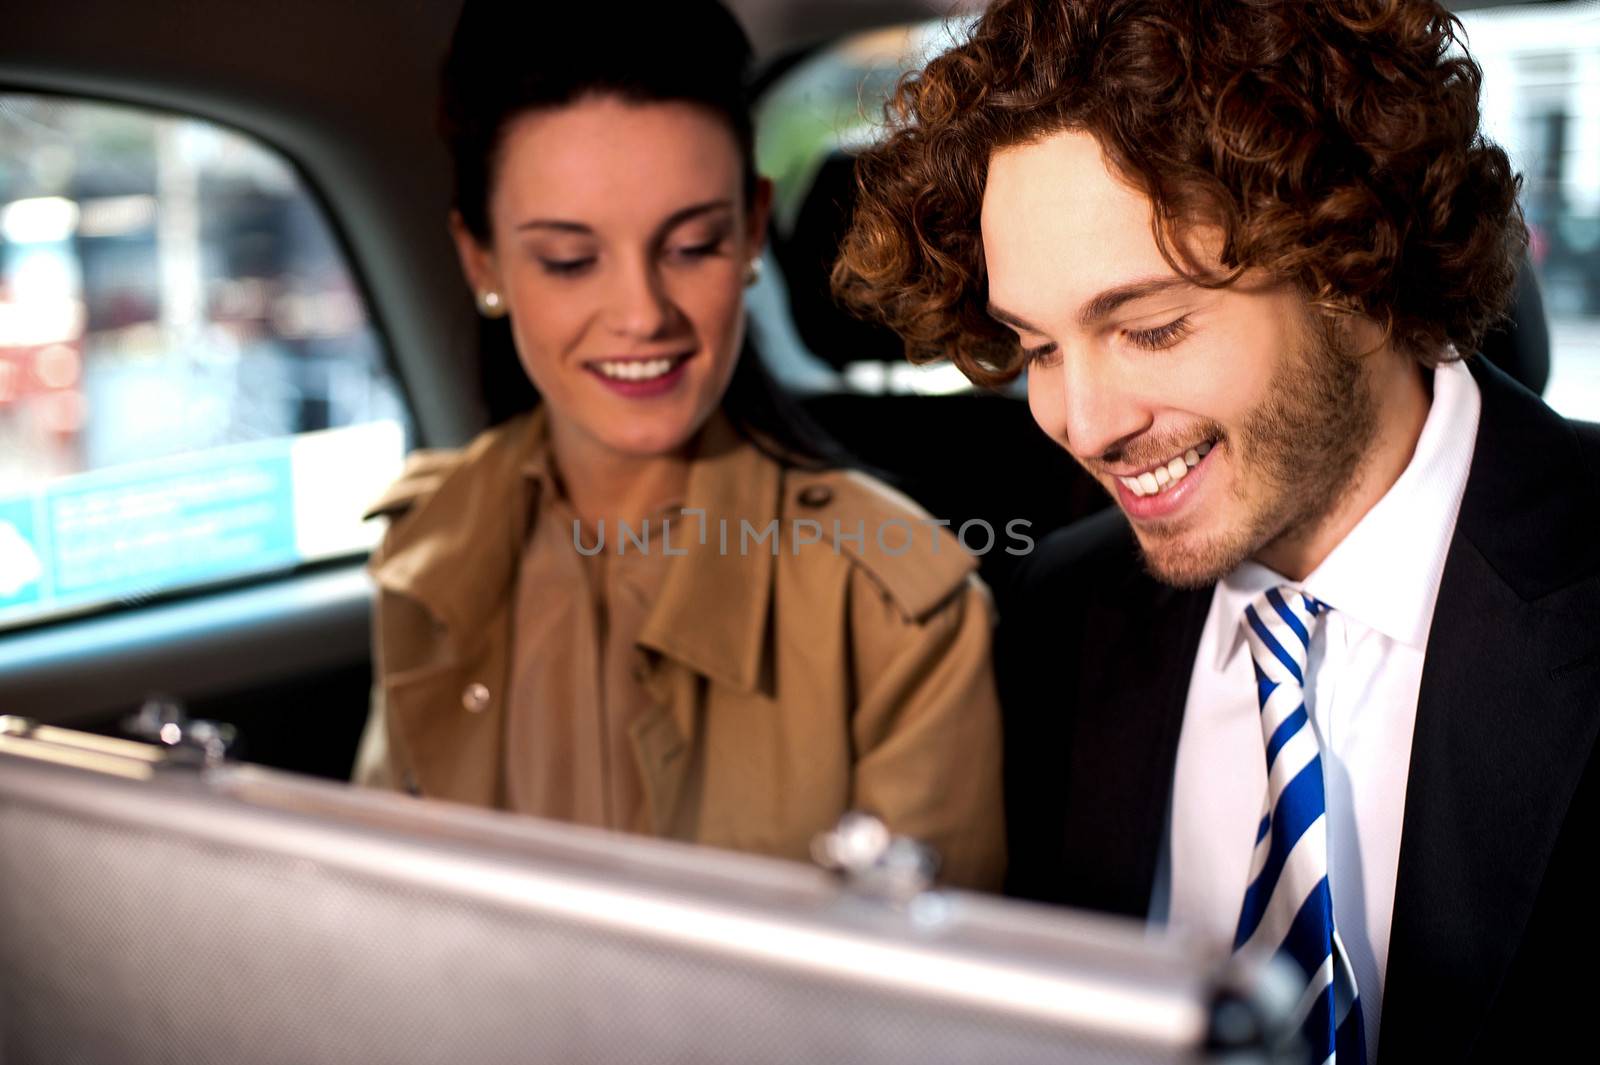 Business colleagues travelling together in taxi cab by stockyimages